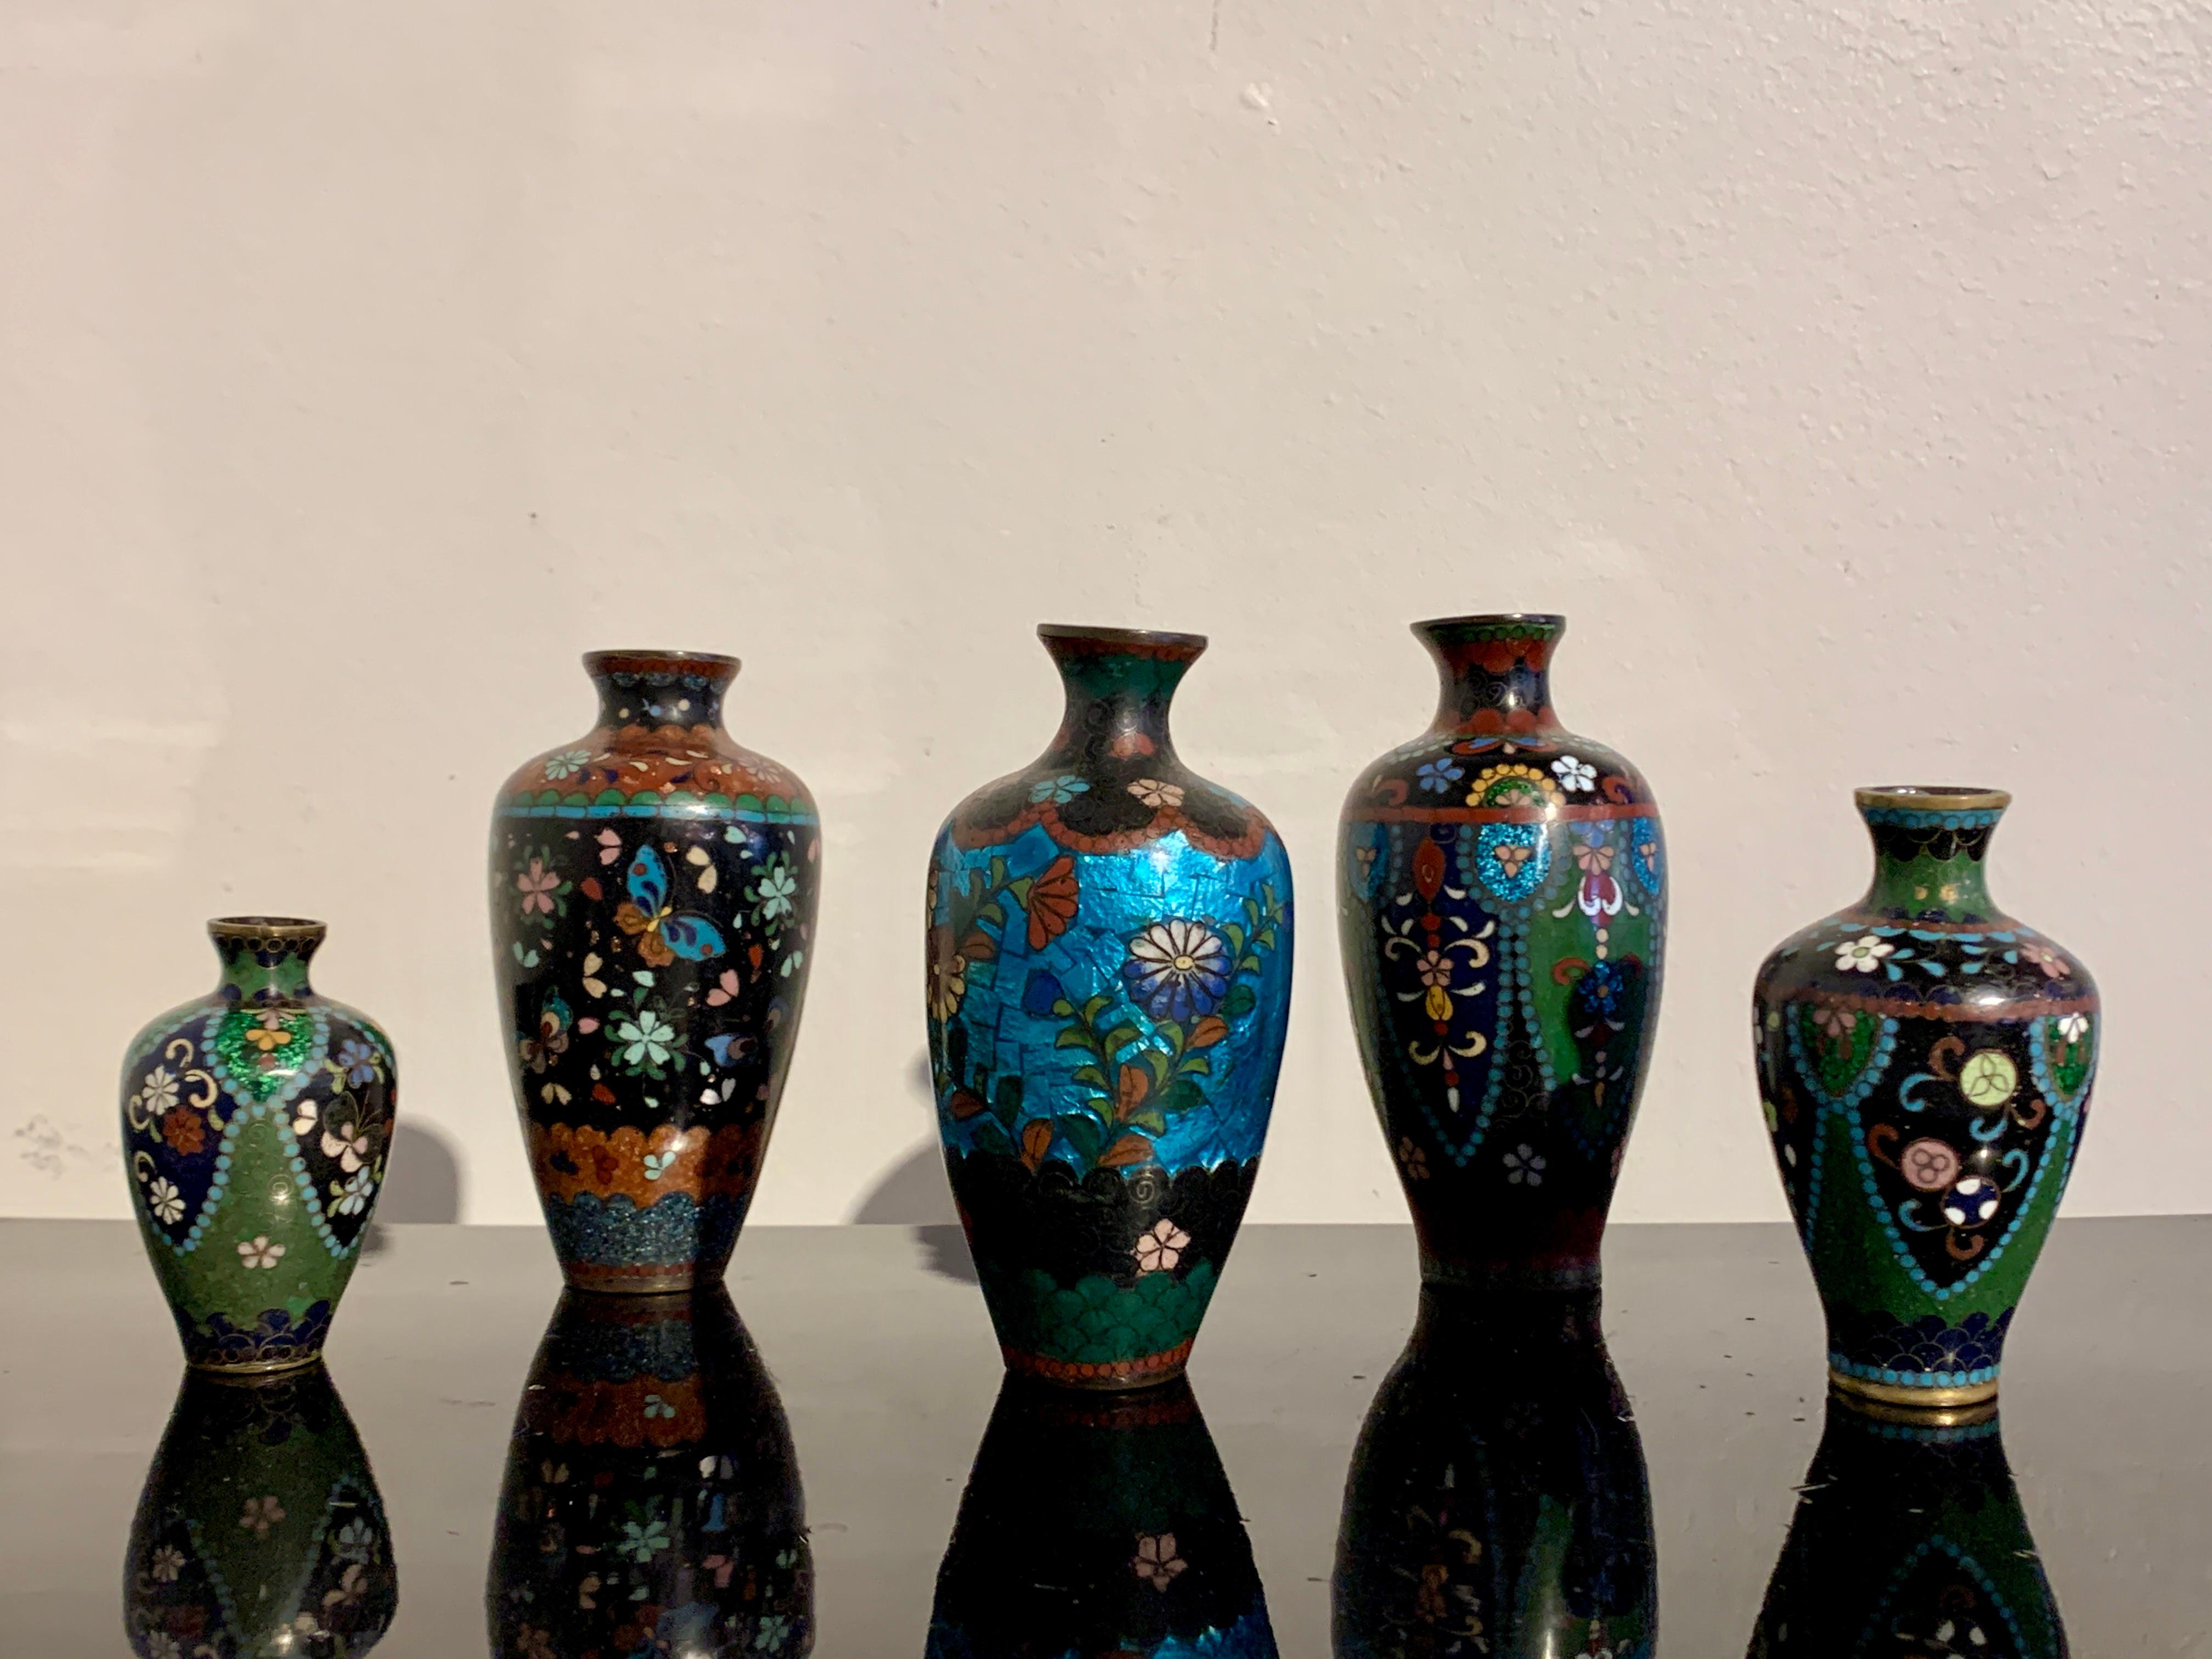 A charming group of five Japanese cloisonné and ginbari foiled vases, Meiji period, early 20th century, Japan.

The group consists of one vase with cloisonné chrysanthemum blossoms against bold and bright turquoise ginbari foil background, two